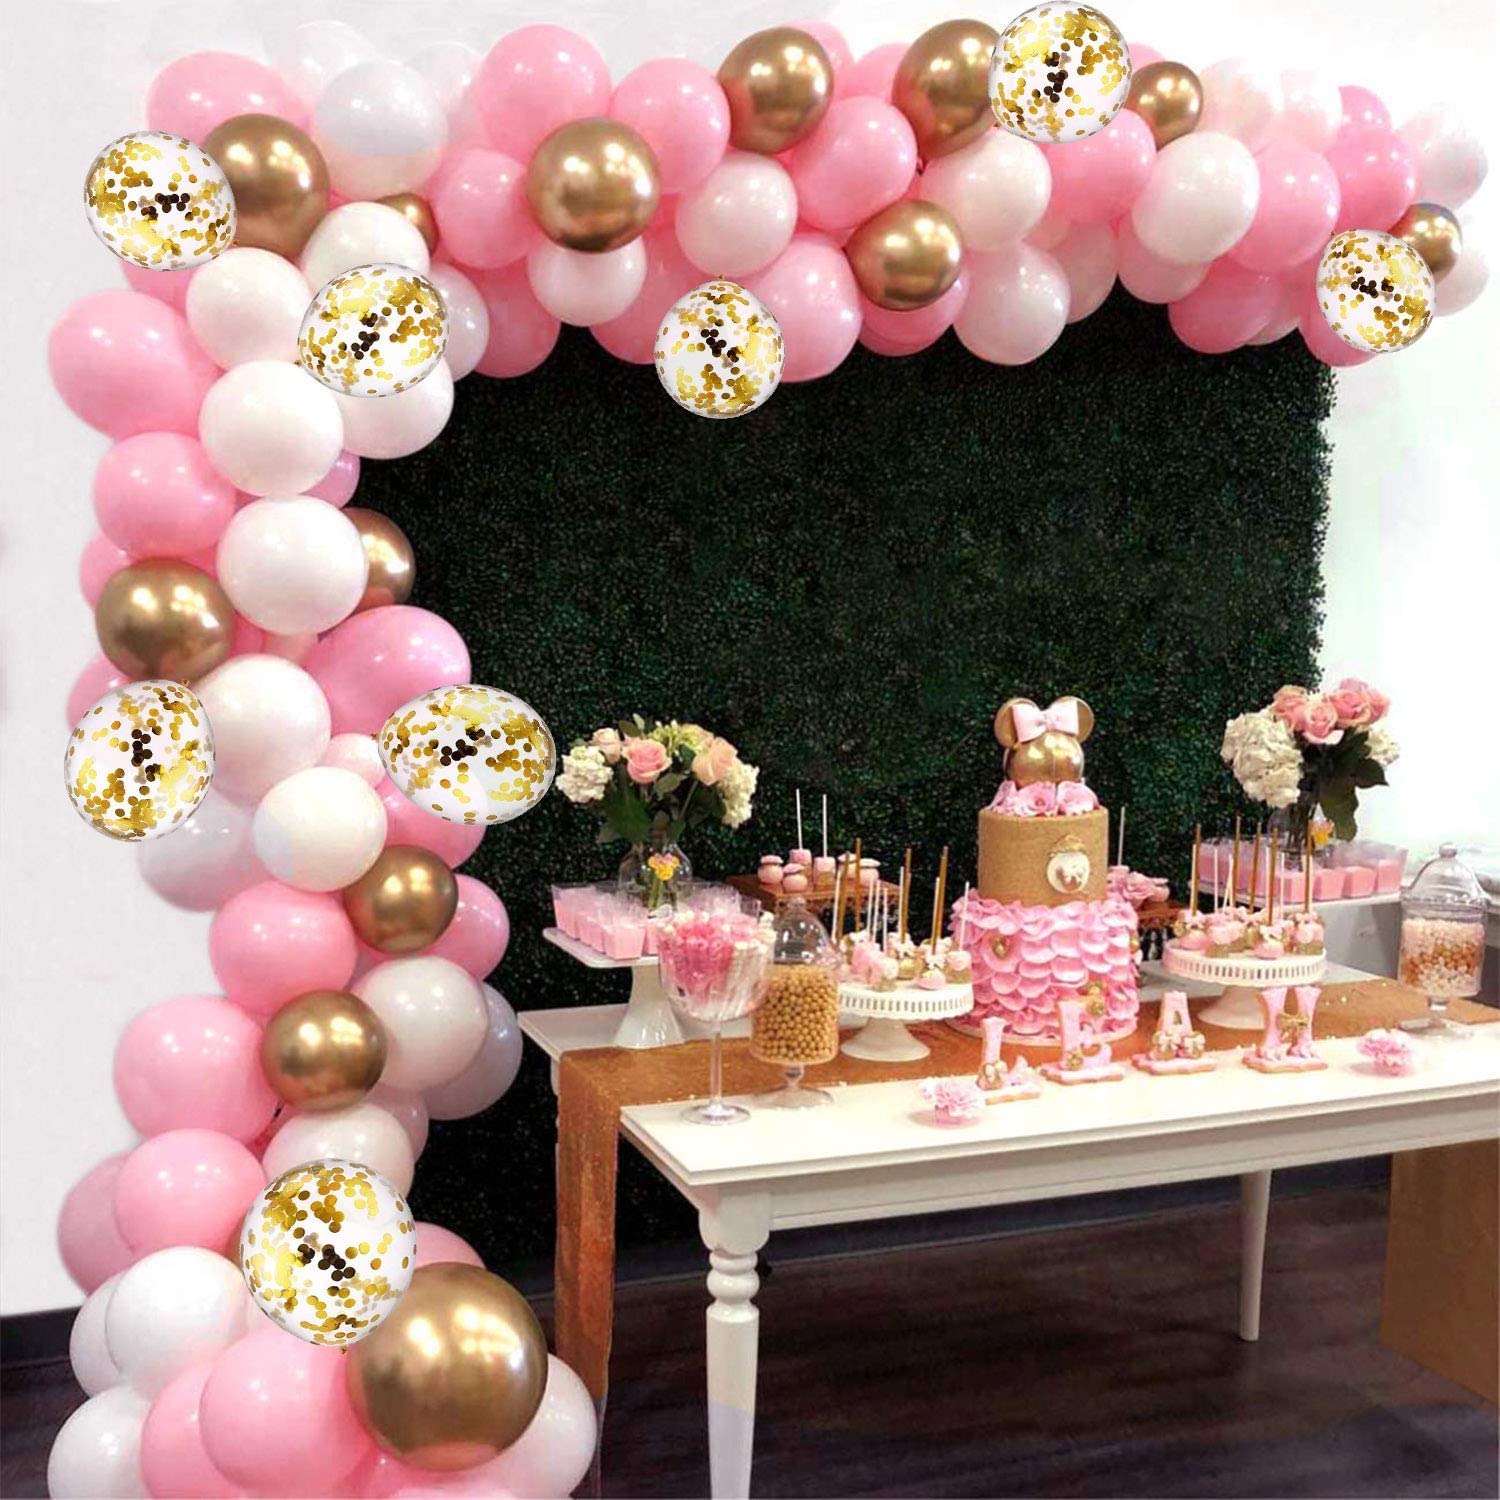 decor need party Balloon Arch Kit Garland,118pcs Pink White Gold Balloons Pack Arch for Girl Birthday Baby Shower Bachelorette Party Wedding Decorations KB-044